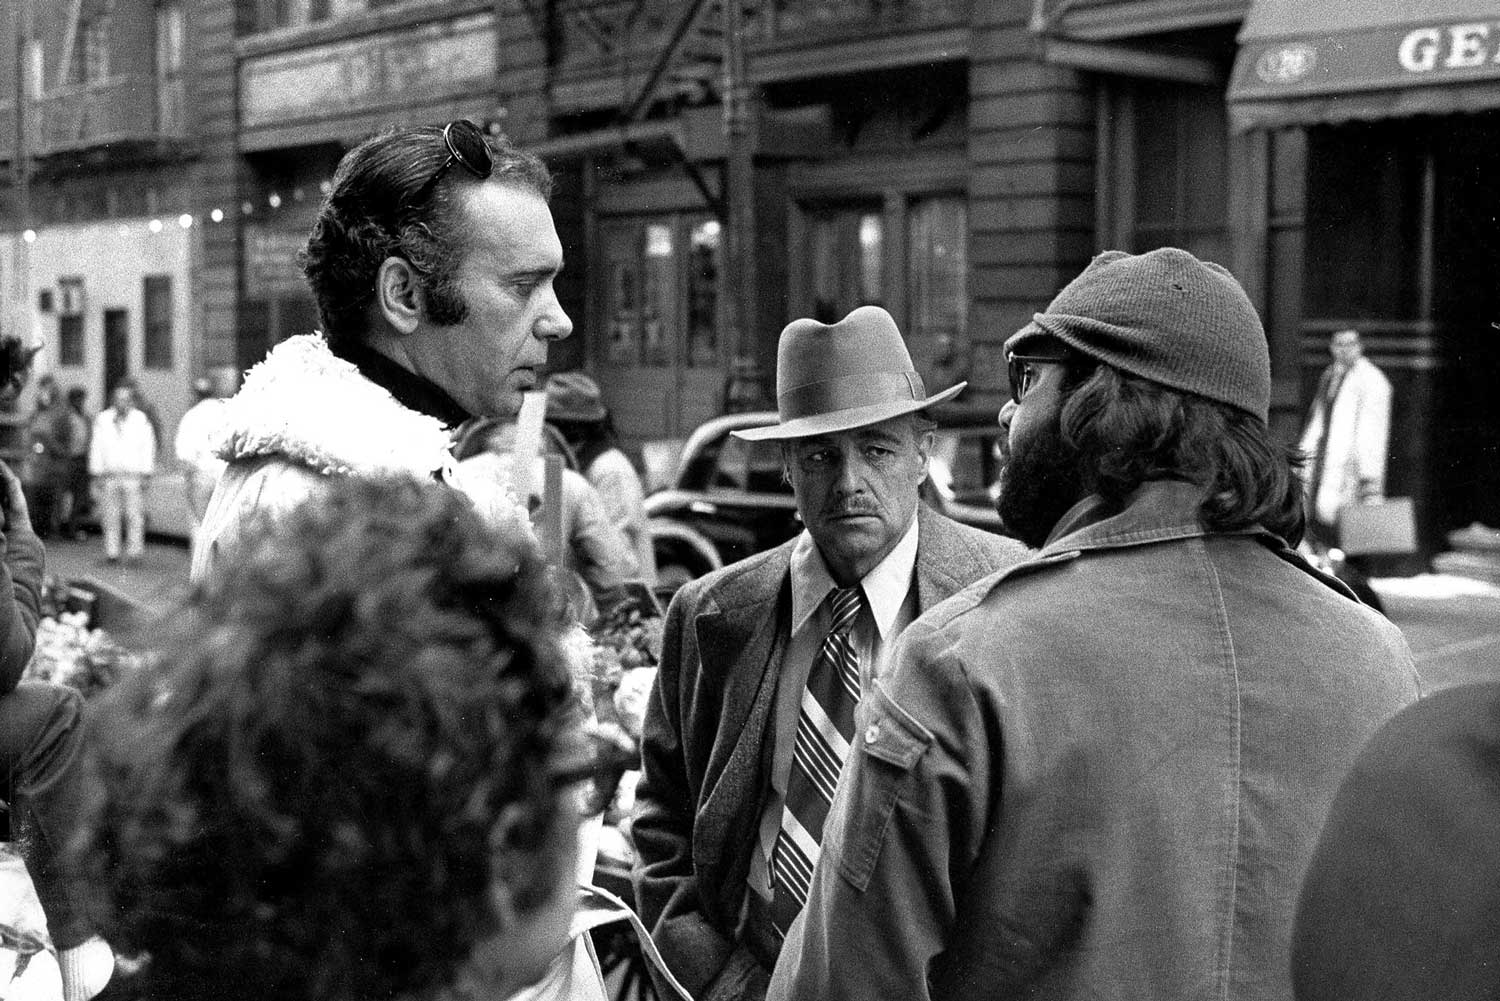 On set with Marlon Brando, as Don Vito Corleone, Francis F. Coppola to the right of the frame and Albert S. Ruddy to the left (From the Everett Collection/vanityfair.com)